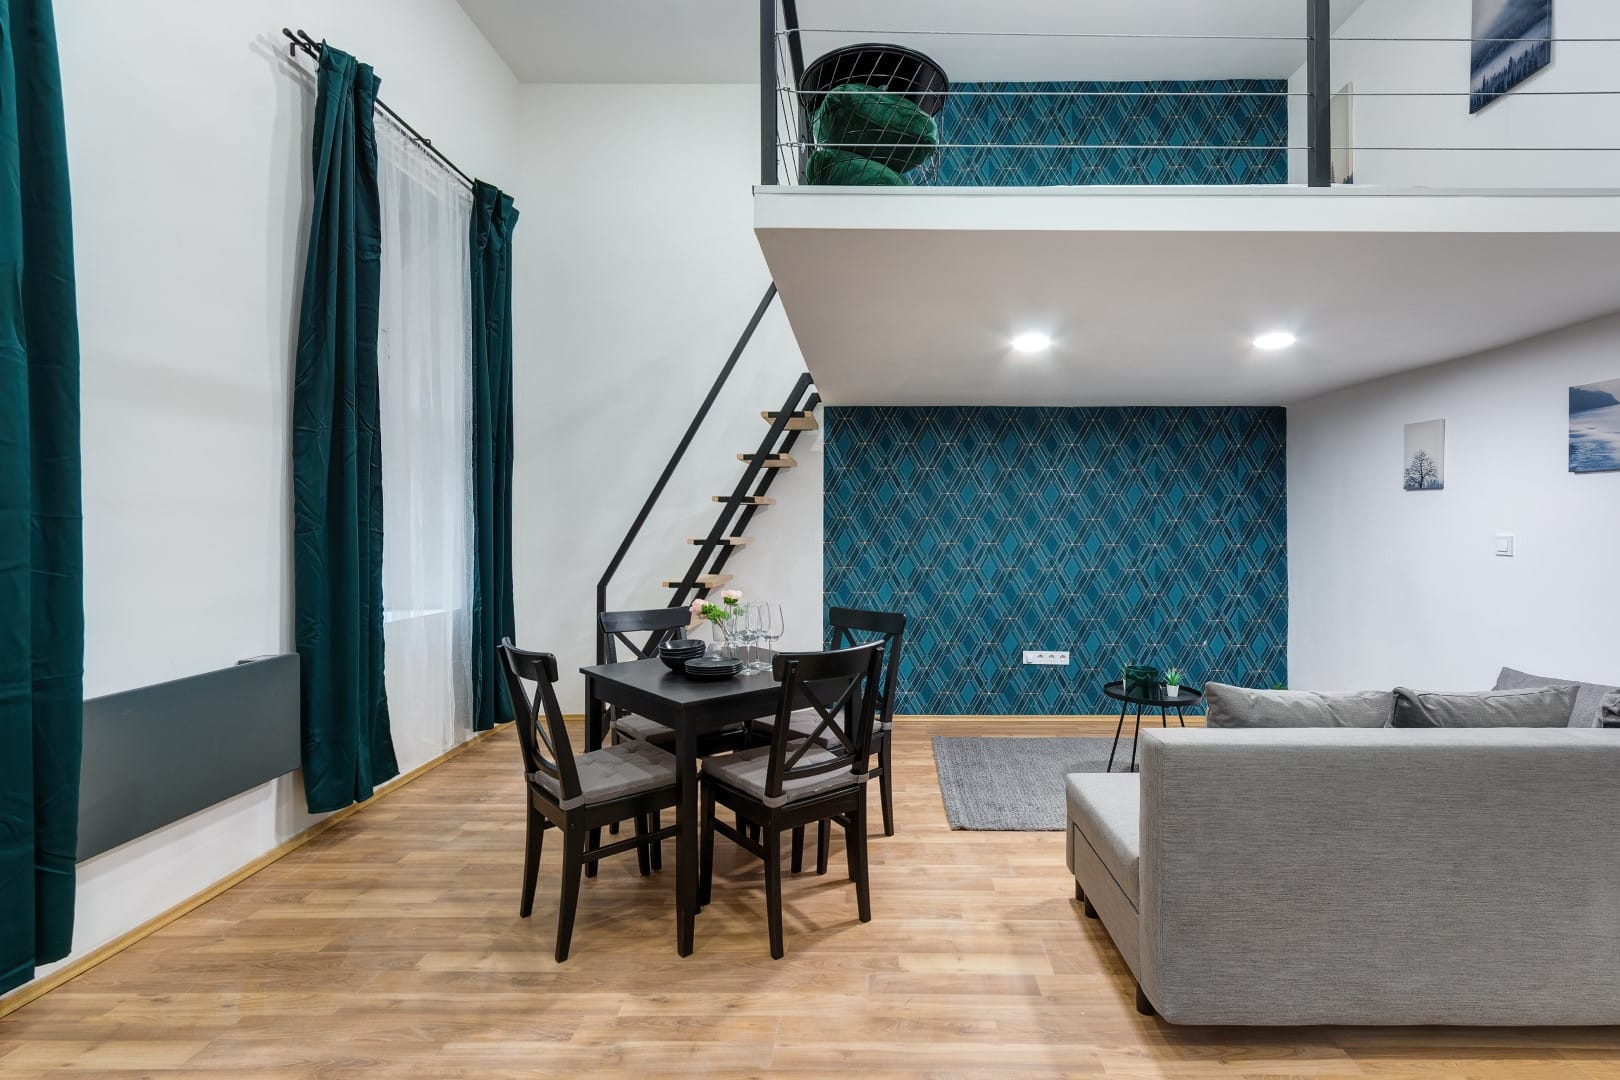 budapest-apartment-for-sale-cheap-budget-flat-downtown-real-estate-property-for-sale-small-studio-renewed-renovated-apartment-f8